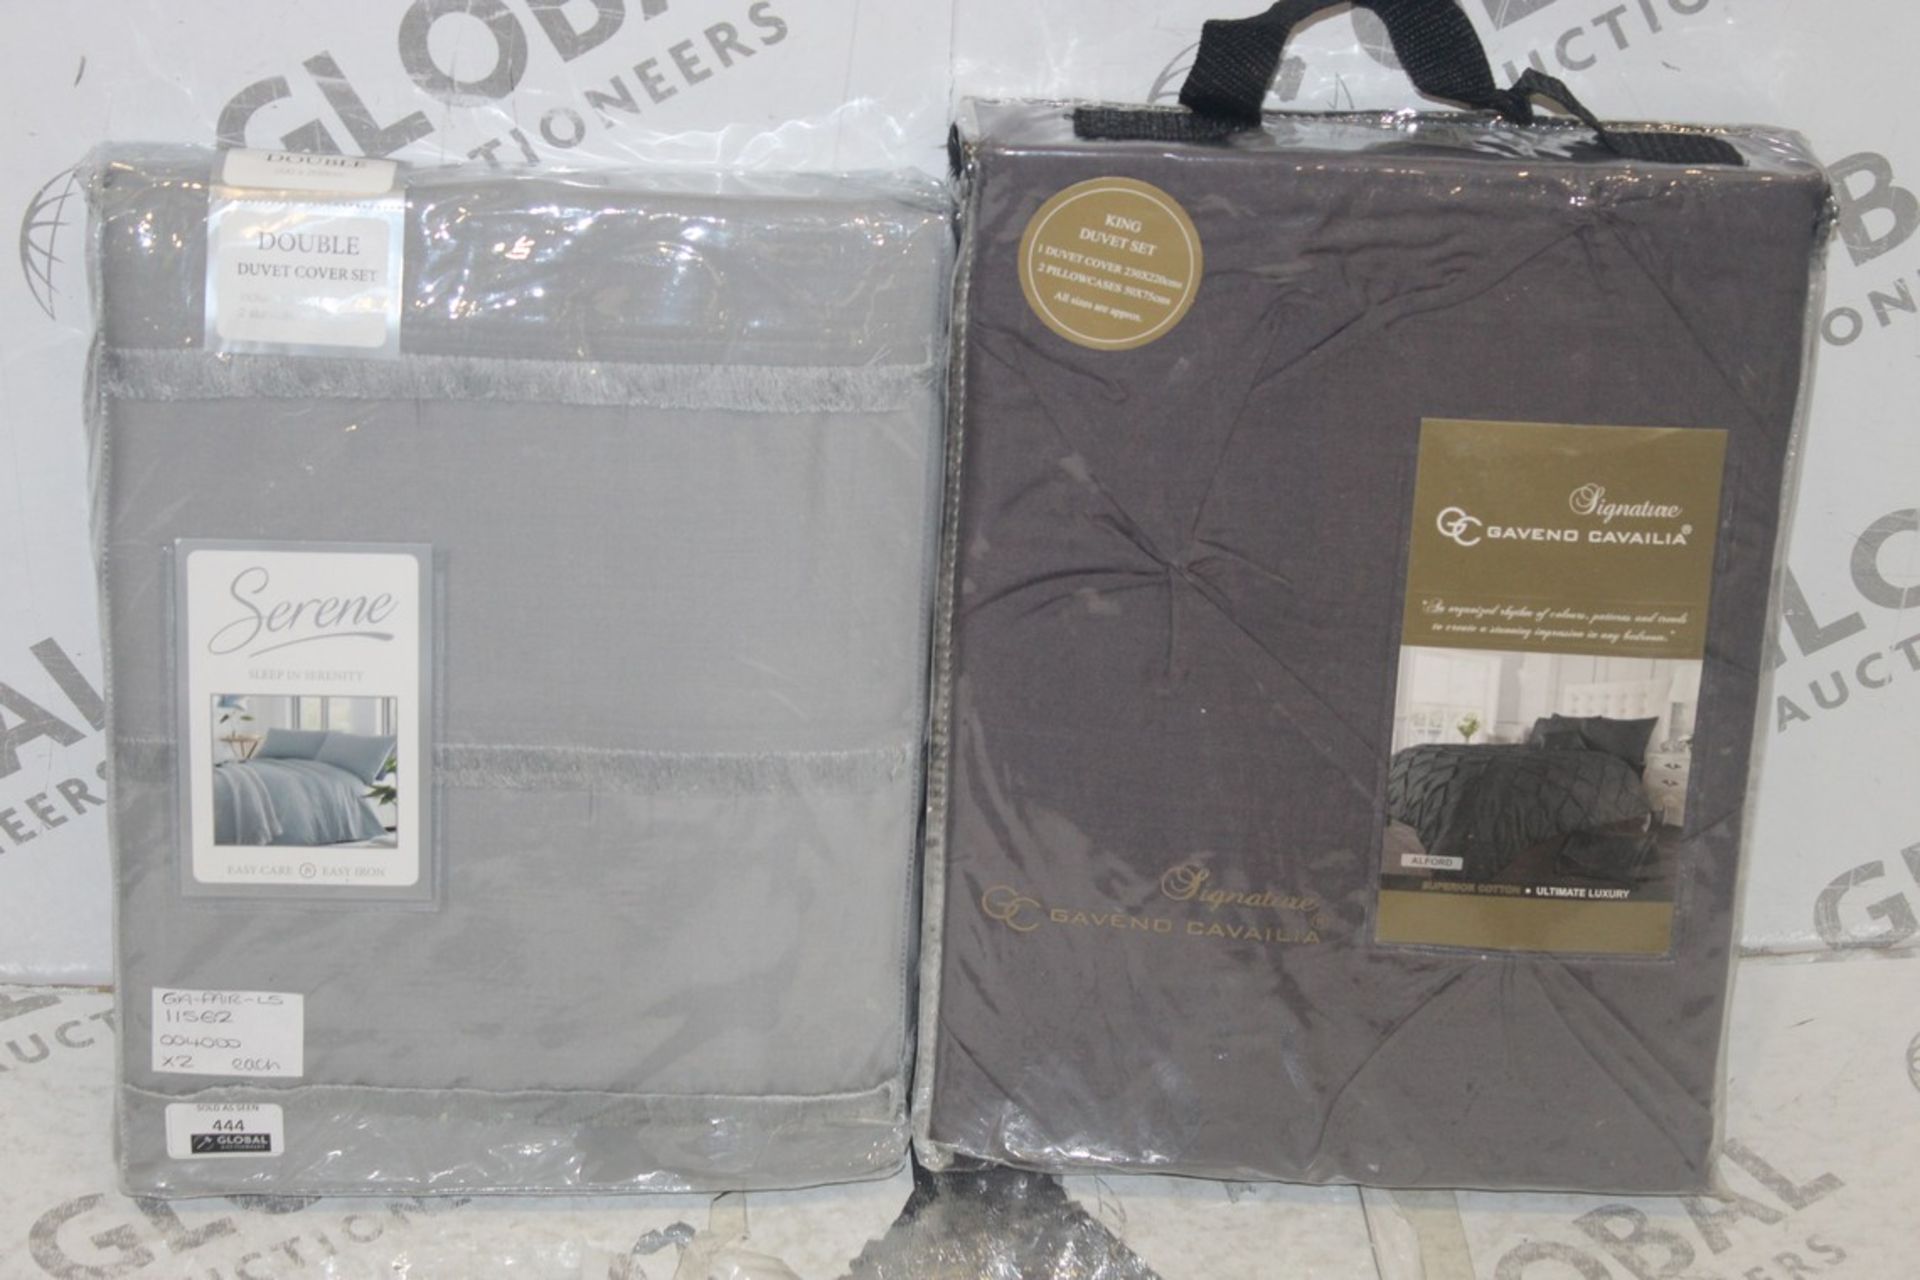 Serene Double Gavino Cavalio King Size Duvet Cover Sets RRP £40 Each (11562) (Pictures Are For